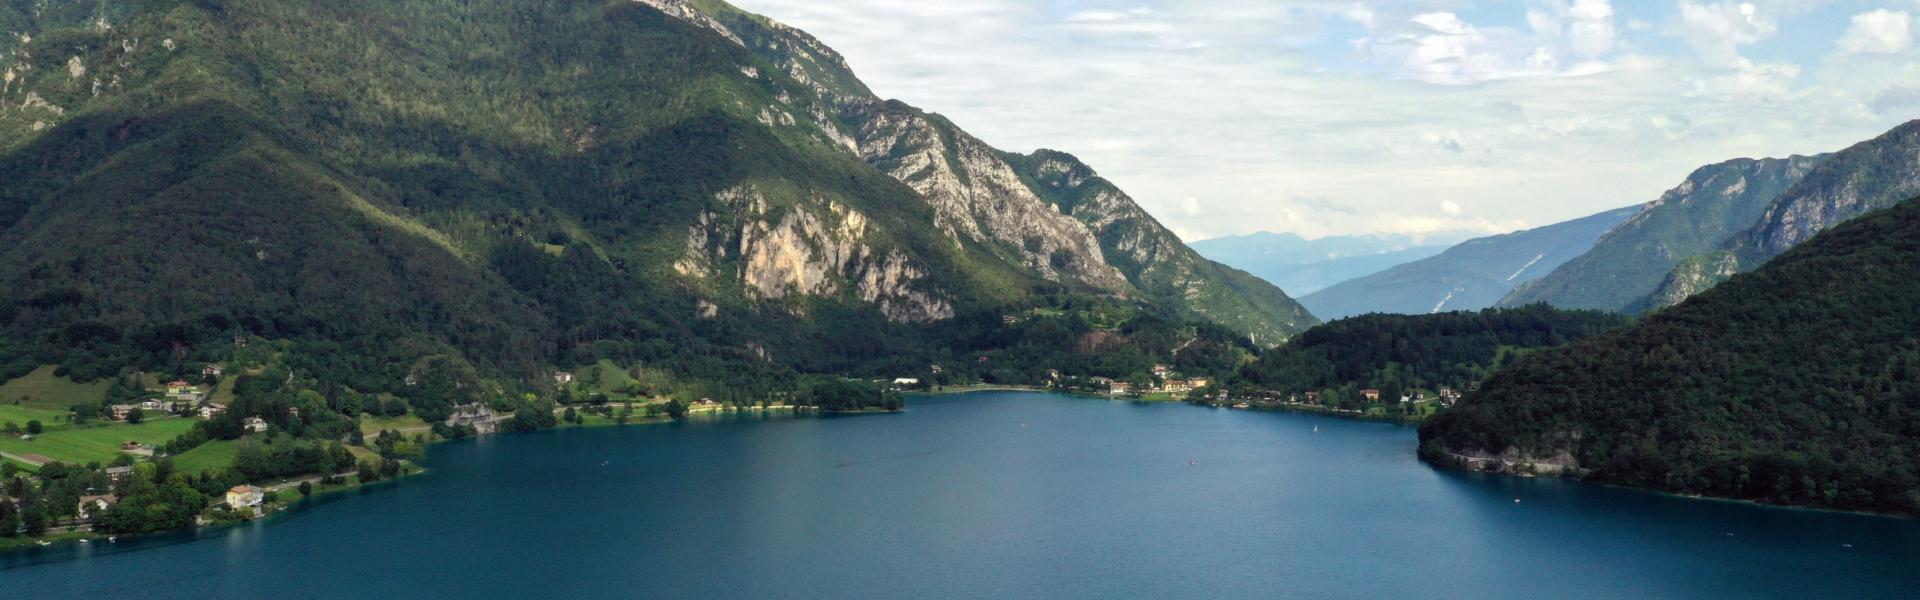 Find the perfect vacation home by Lake Ledro - Casamundo